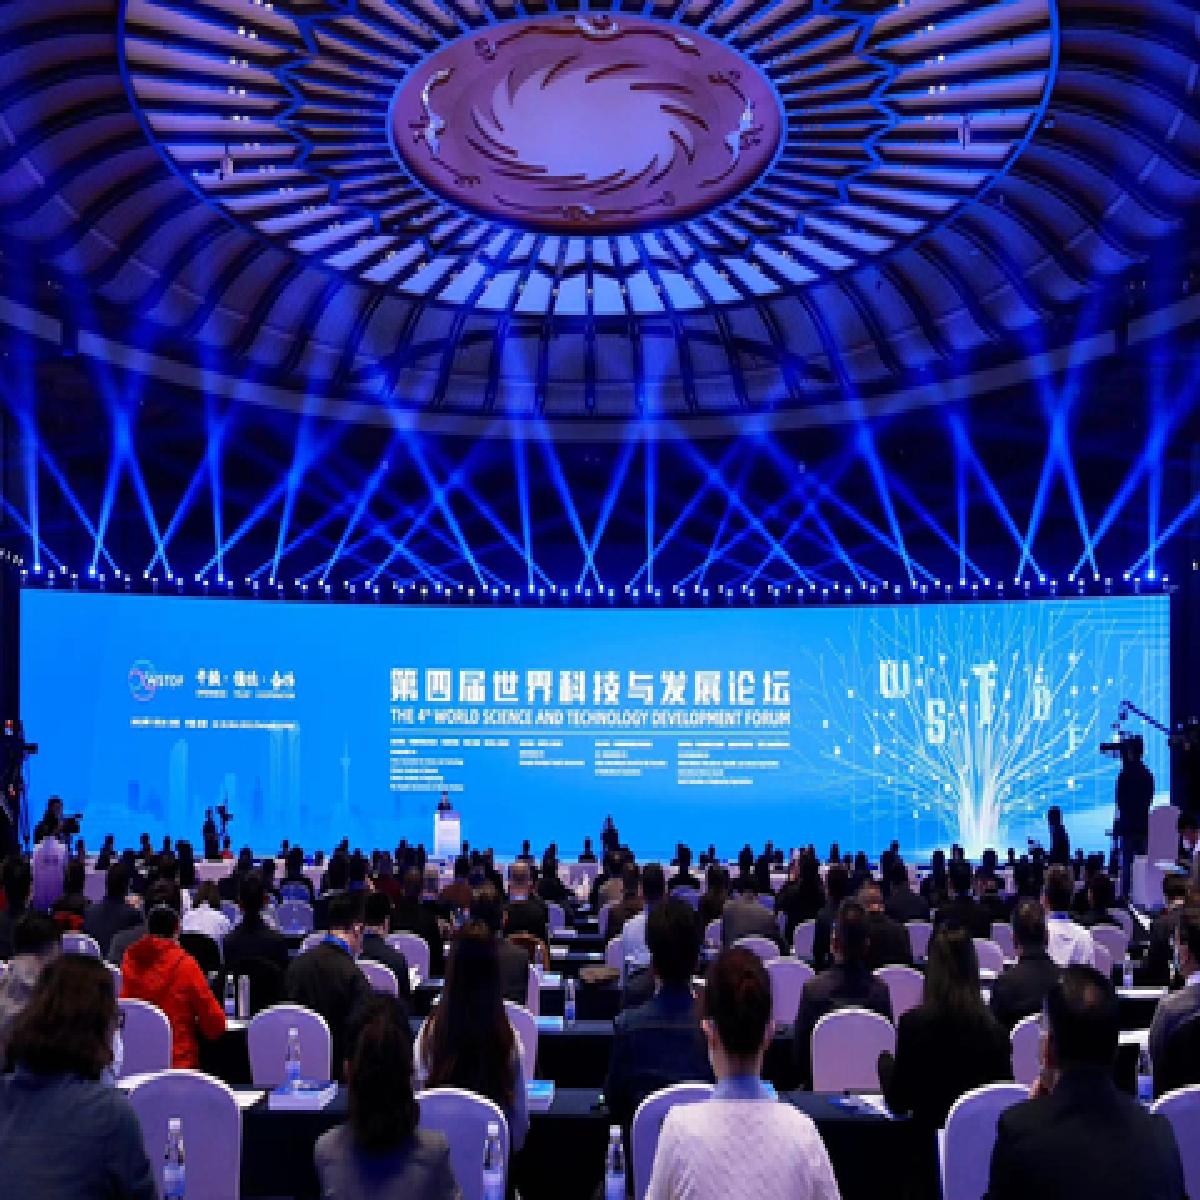 The 4th World Science and Technology Development Forum Held in Chengdu